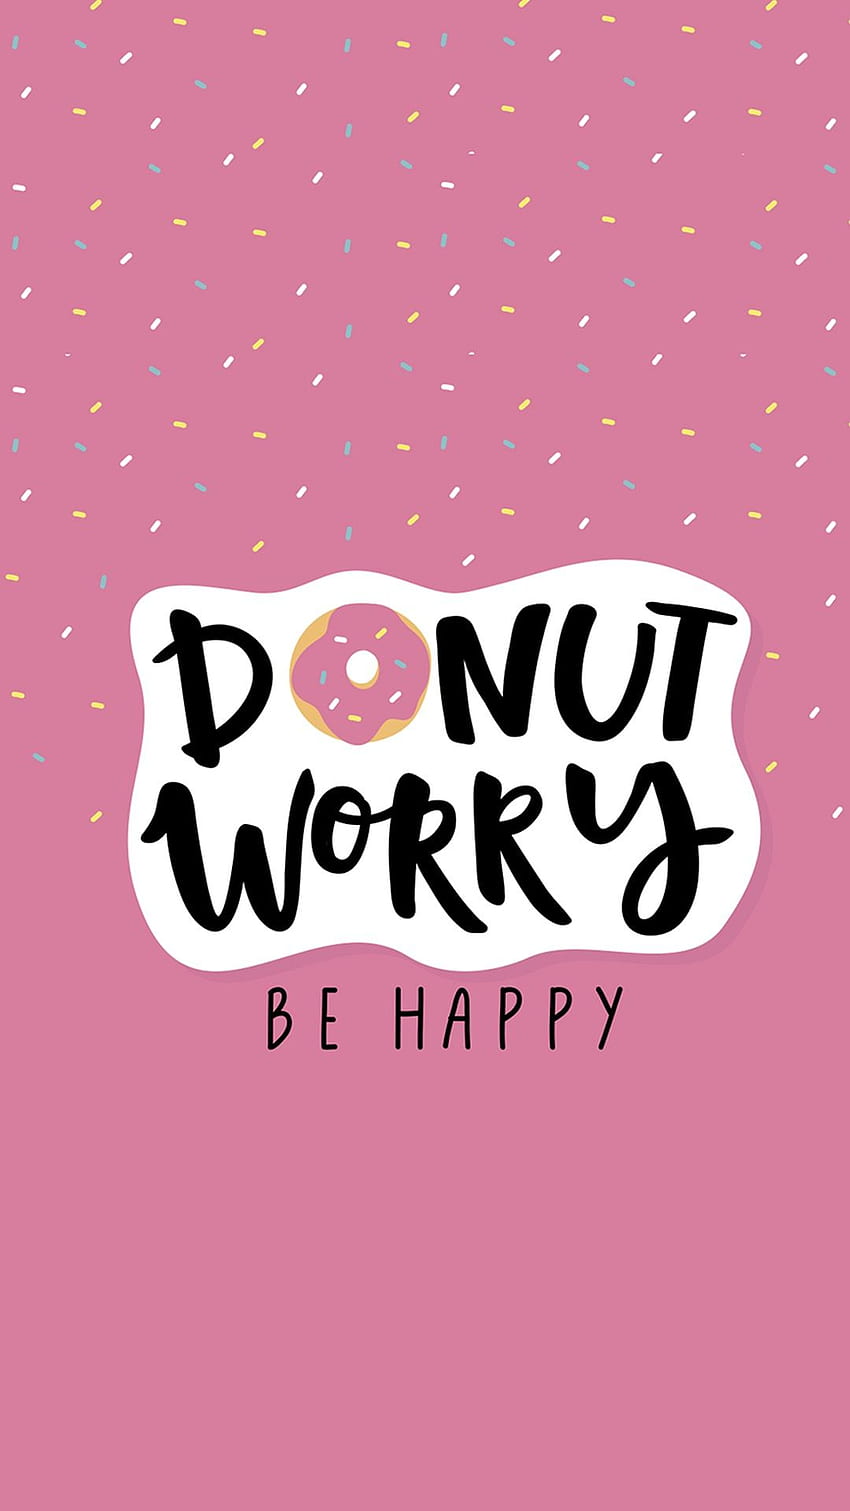 Donut worry be happy – Cool background HD phone wallpaper